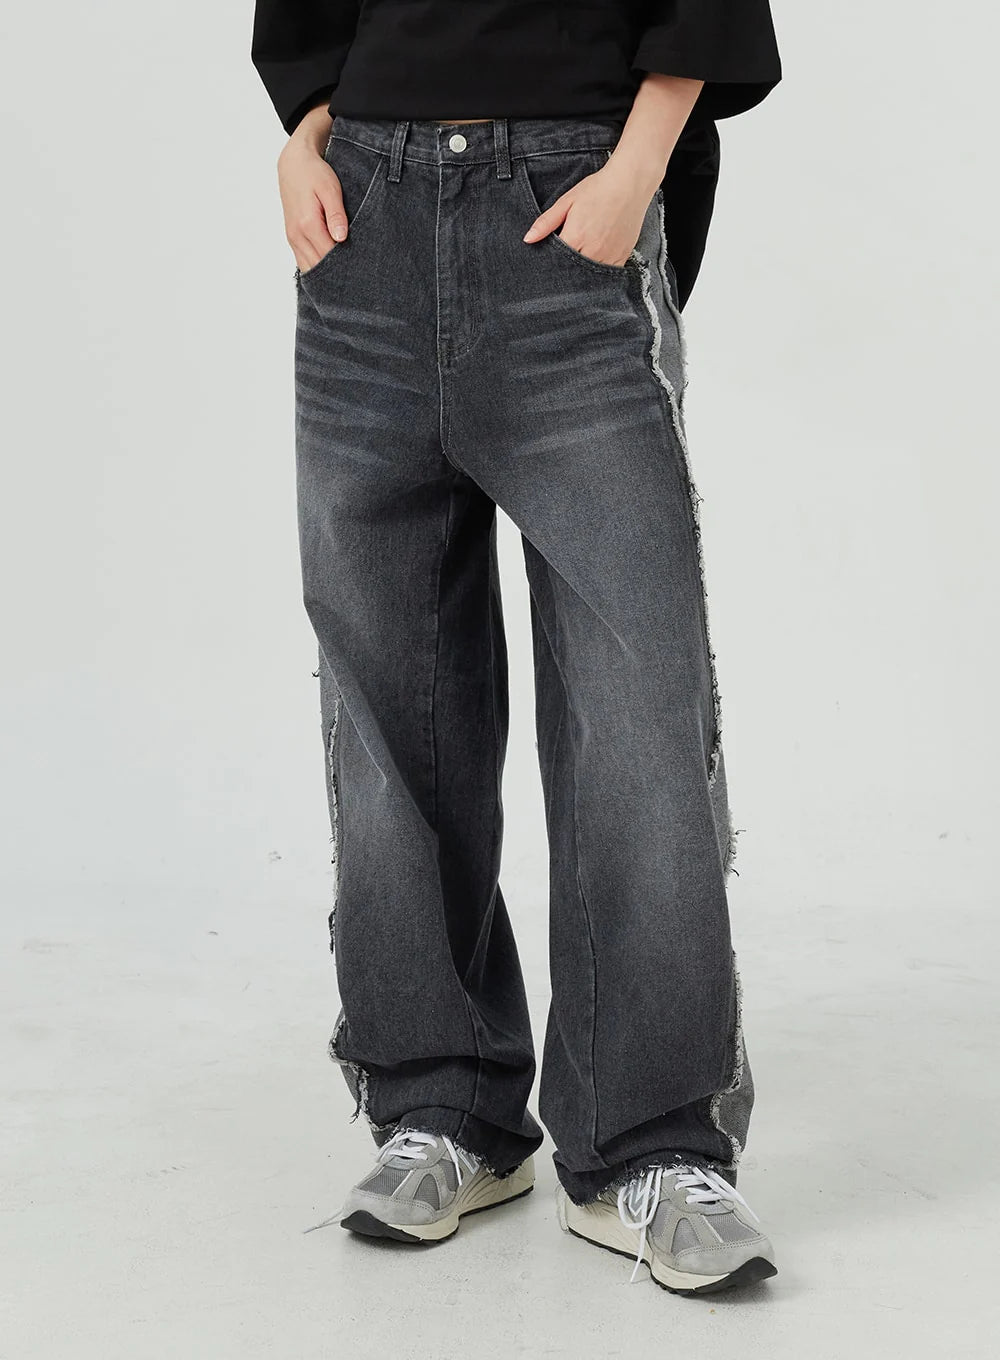 Women's Baggy Jeans: Embrace Comfort & Style with Trendy Denim Selections